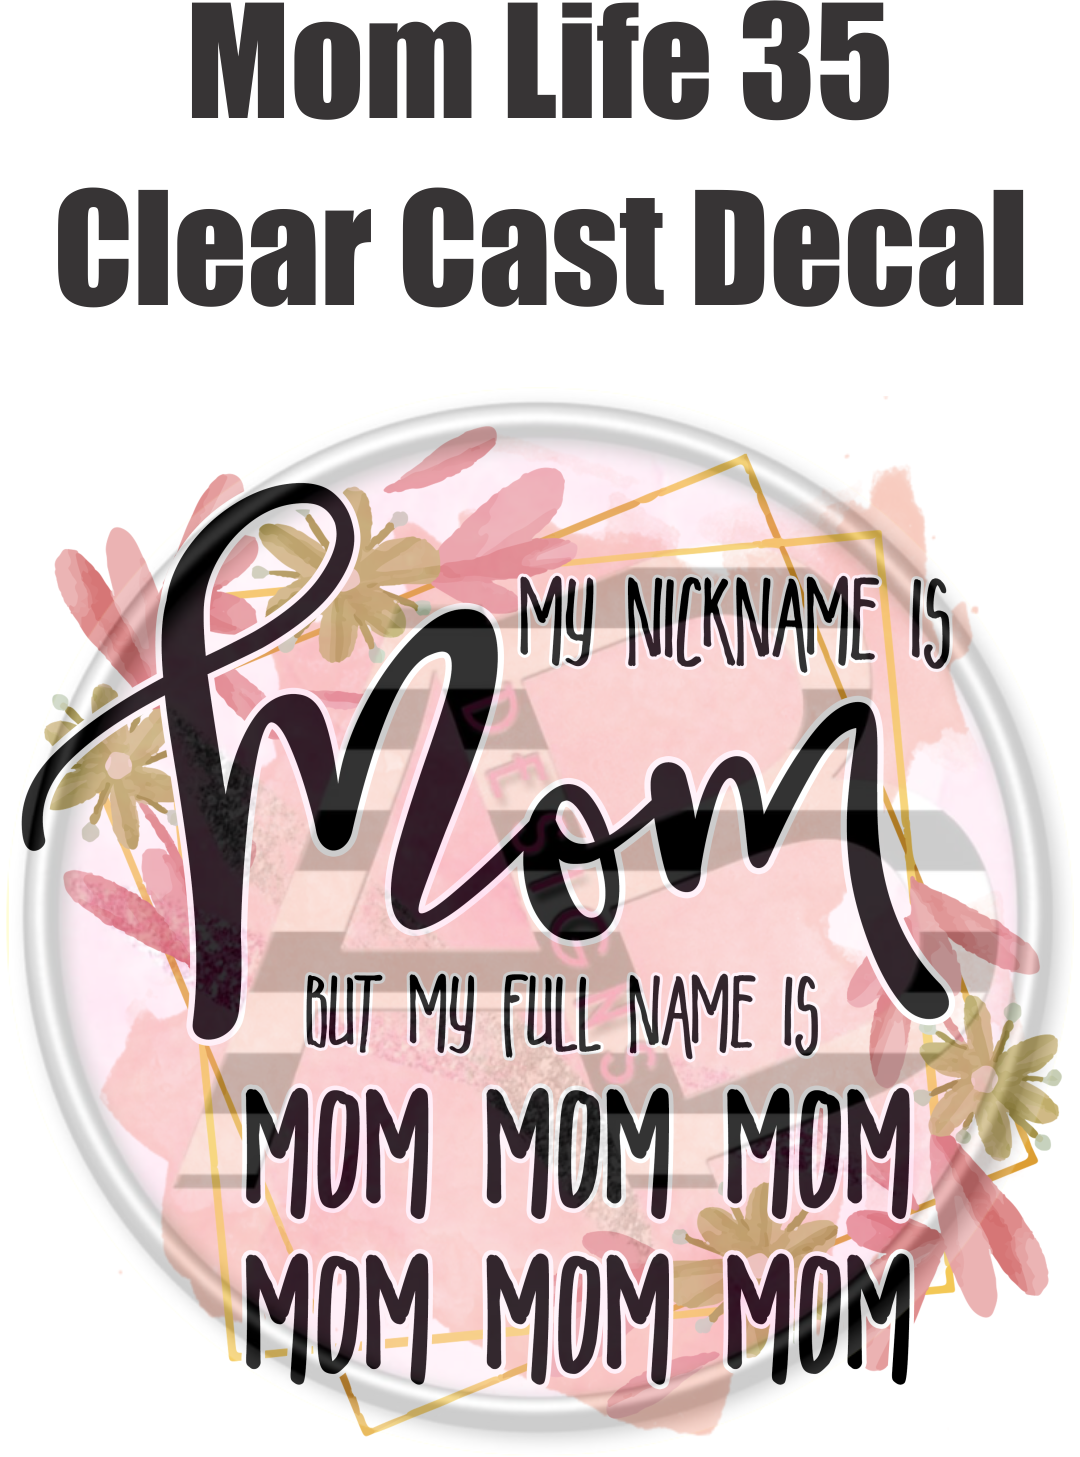 Mom Life 35 - Clear Cast Decal - 25